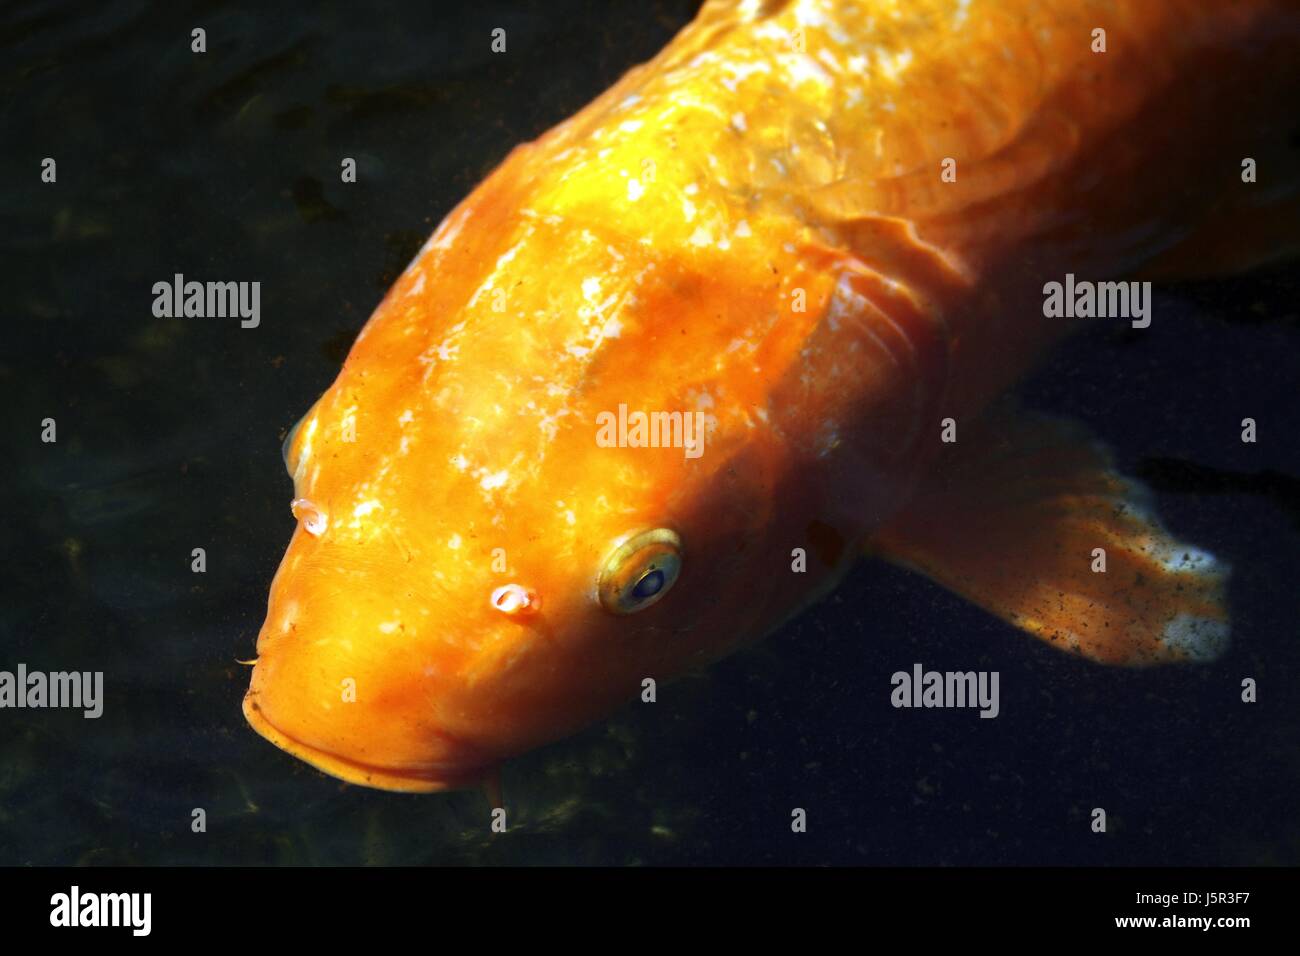 far east animal asia fish hovel bright shiny fresh water pond water landscape Stock Photo